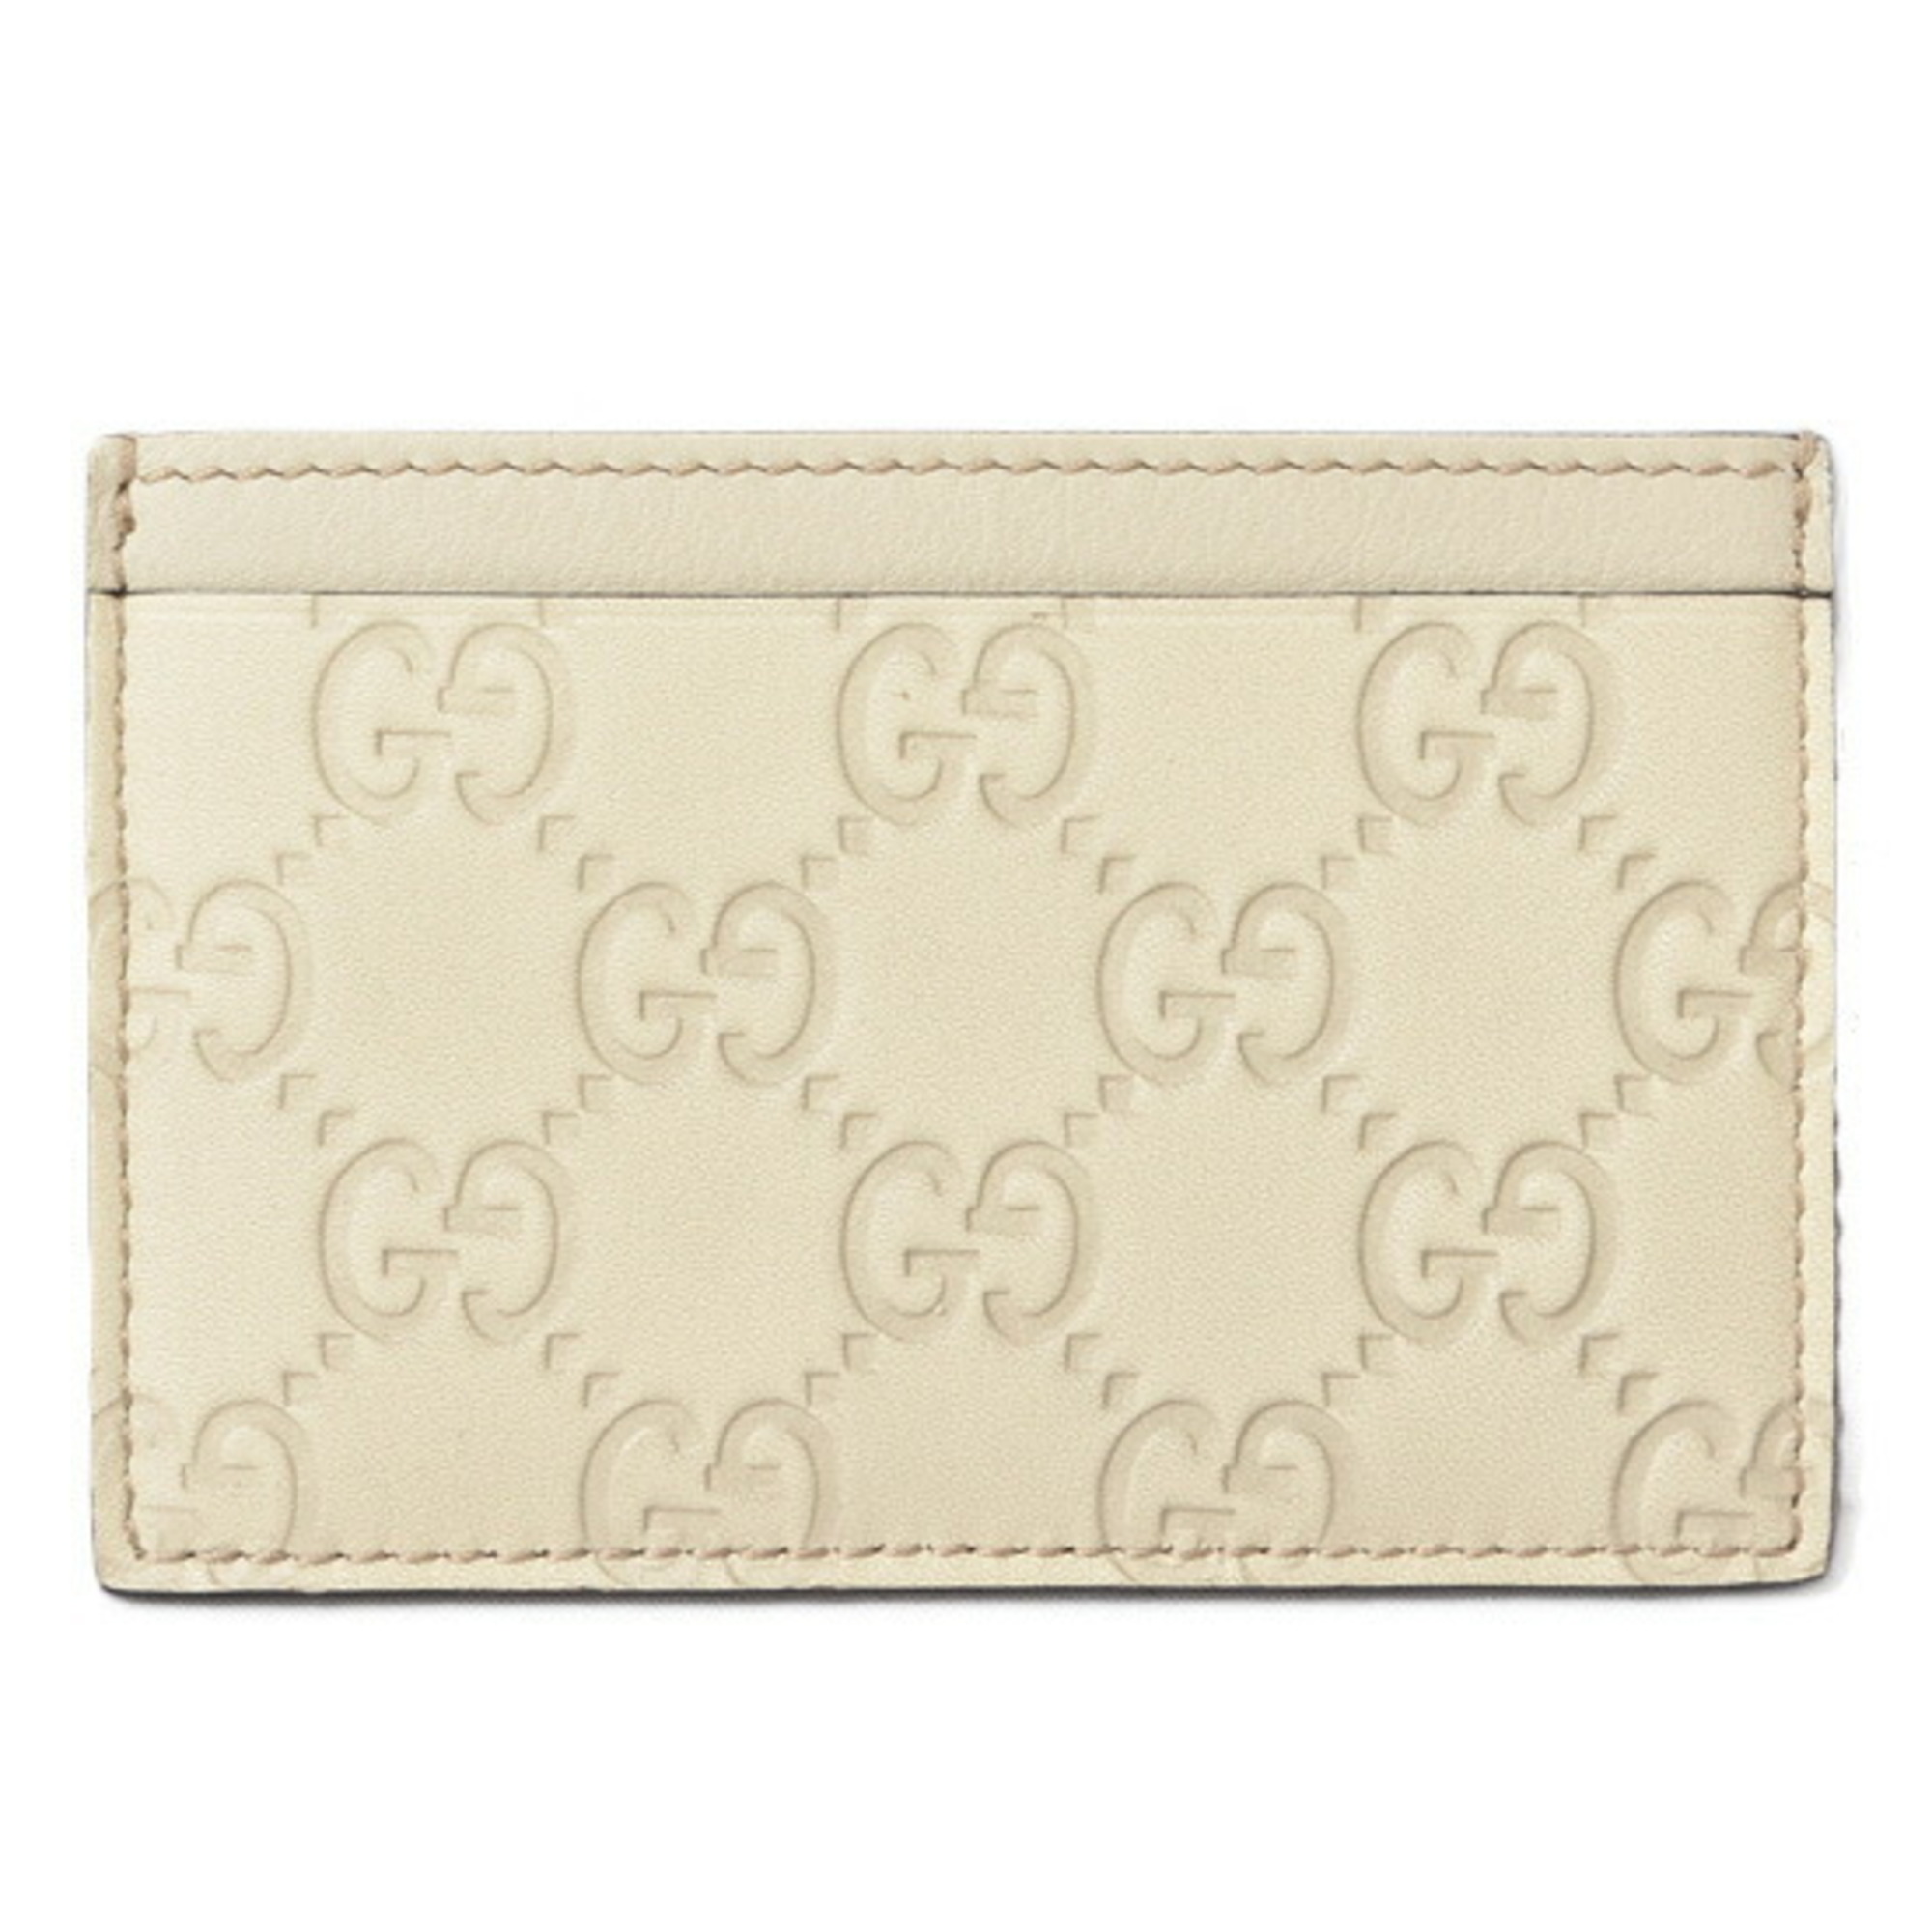 Gucci Card Case Business Holder Pass GUCCI Shima Leather Off White 163233 A0V1G 9022